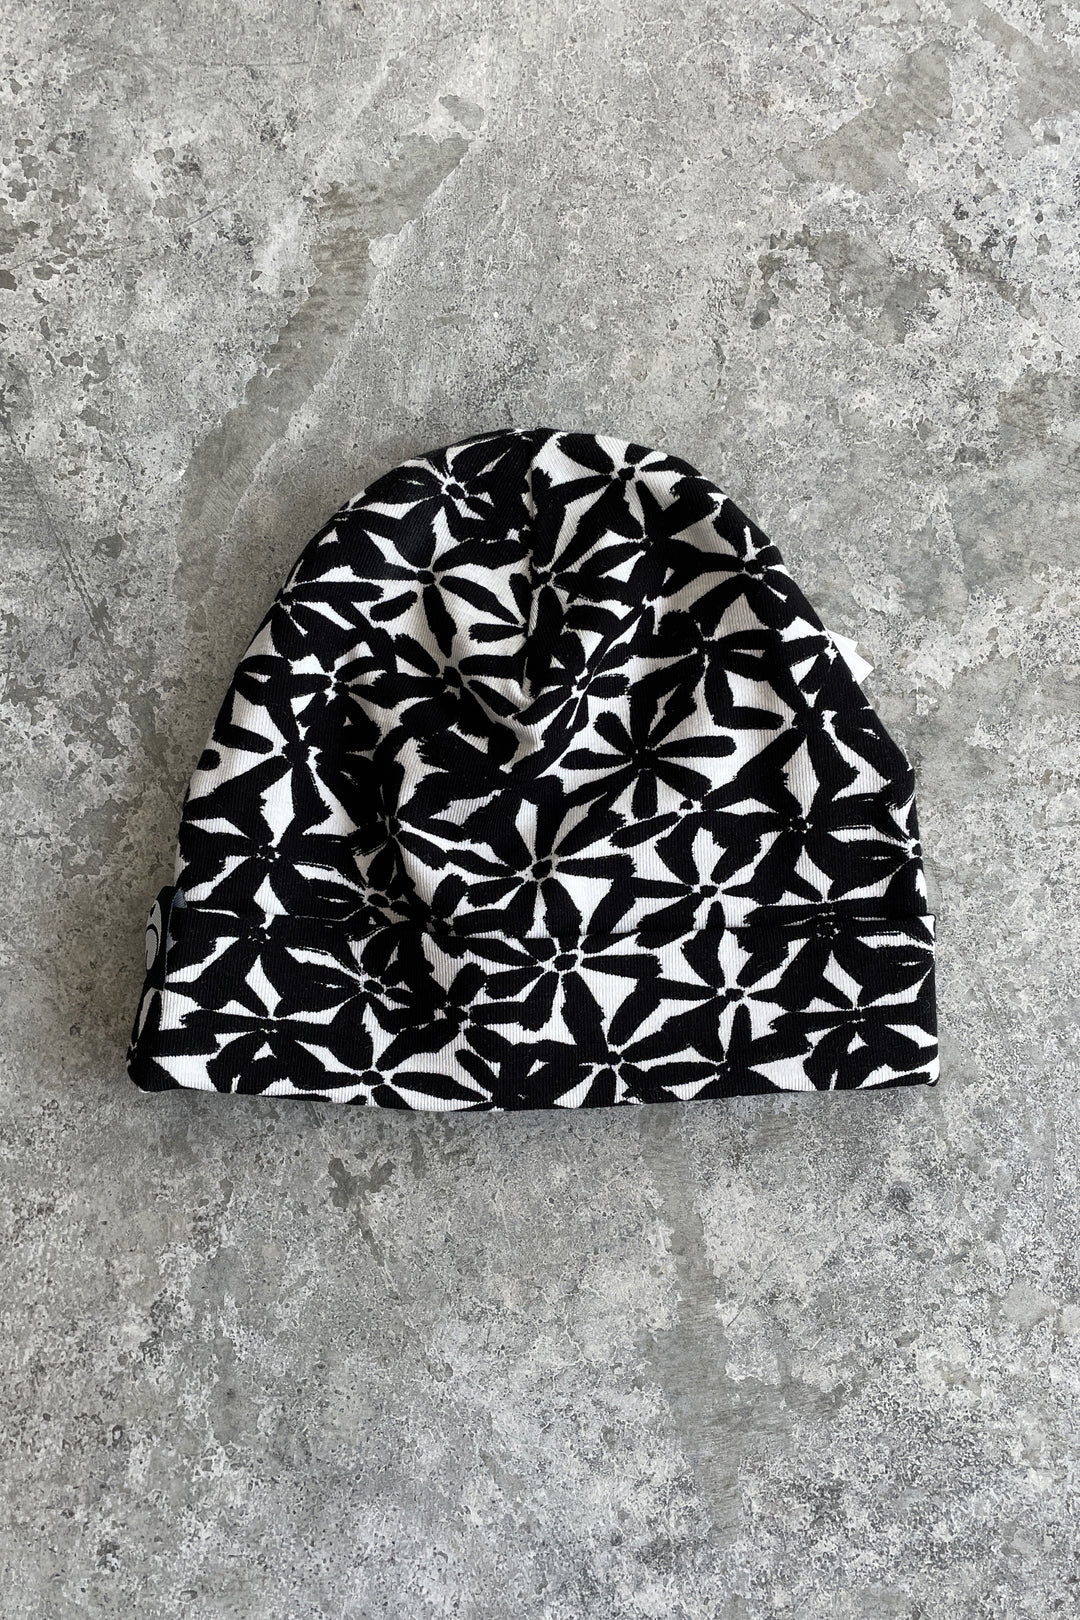 Alix beanie for baby - Black and white